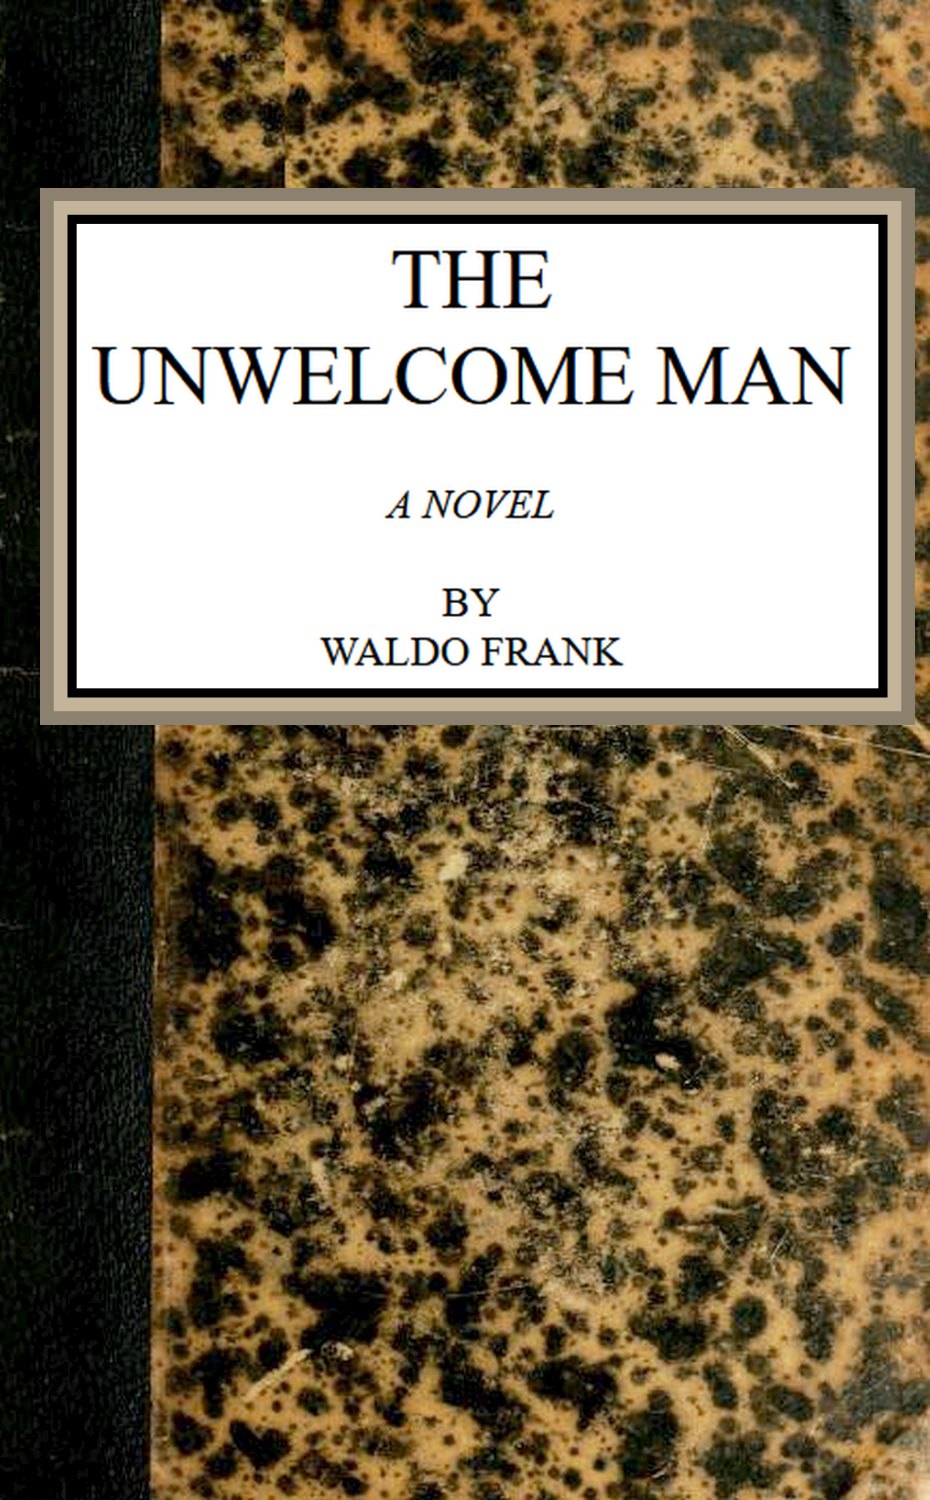 The Project Gutenberg eBook of The unwelcome man, by Waldo Frank.